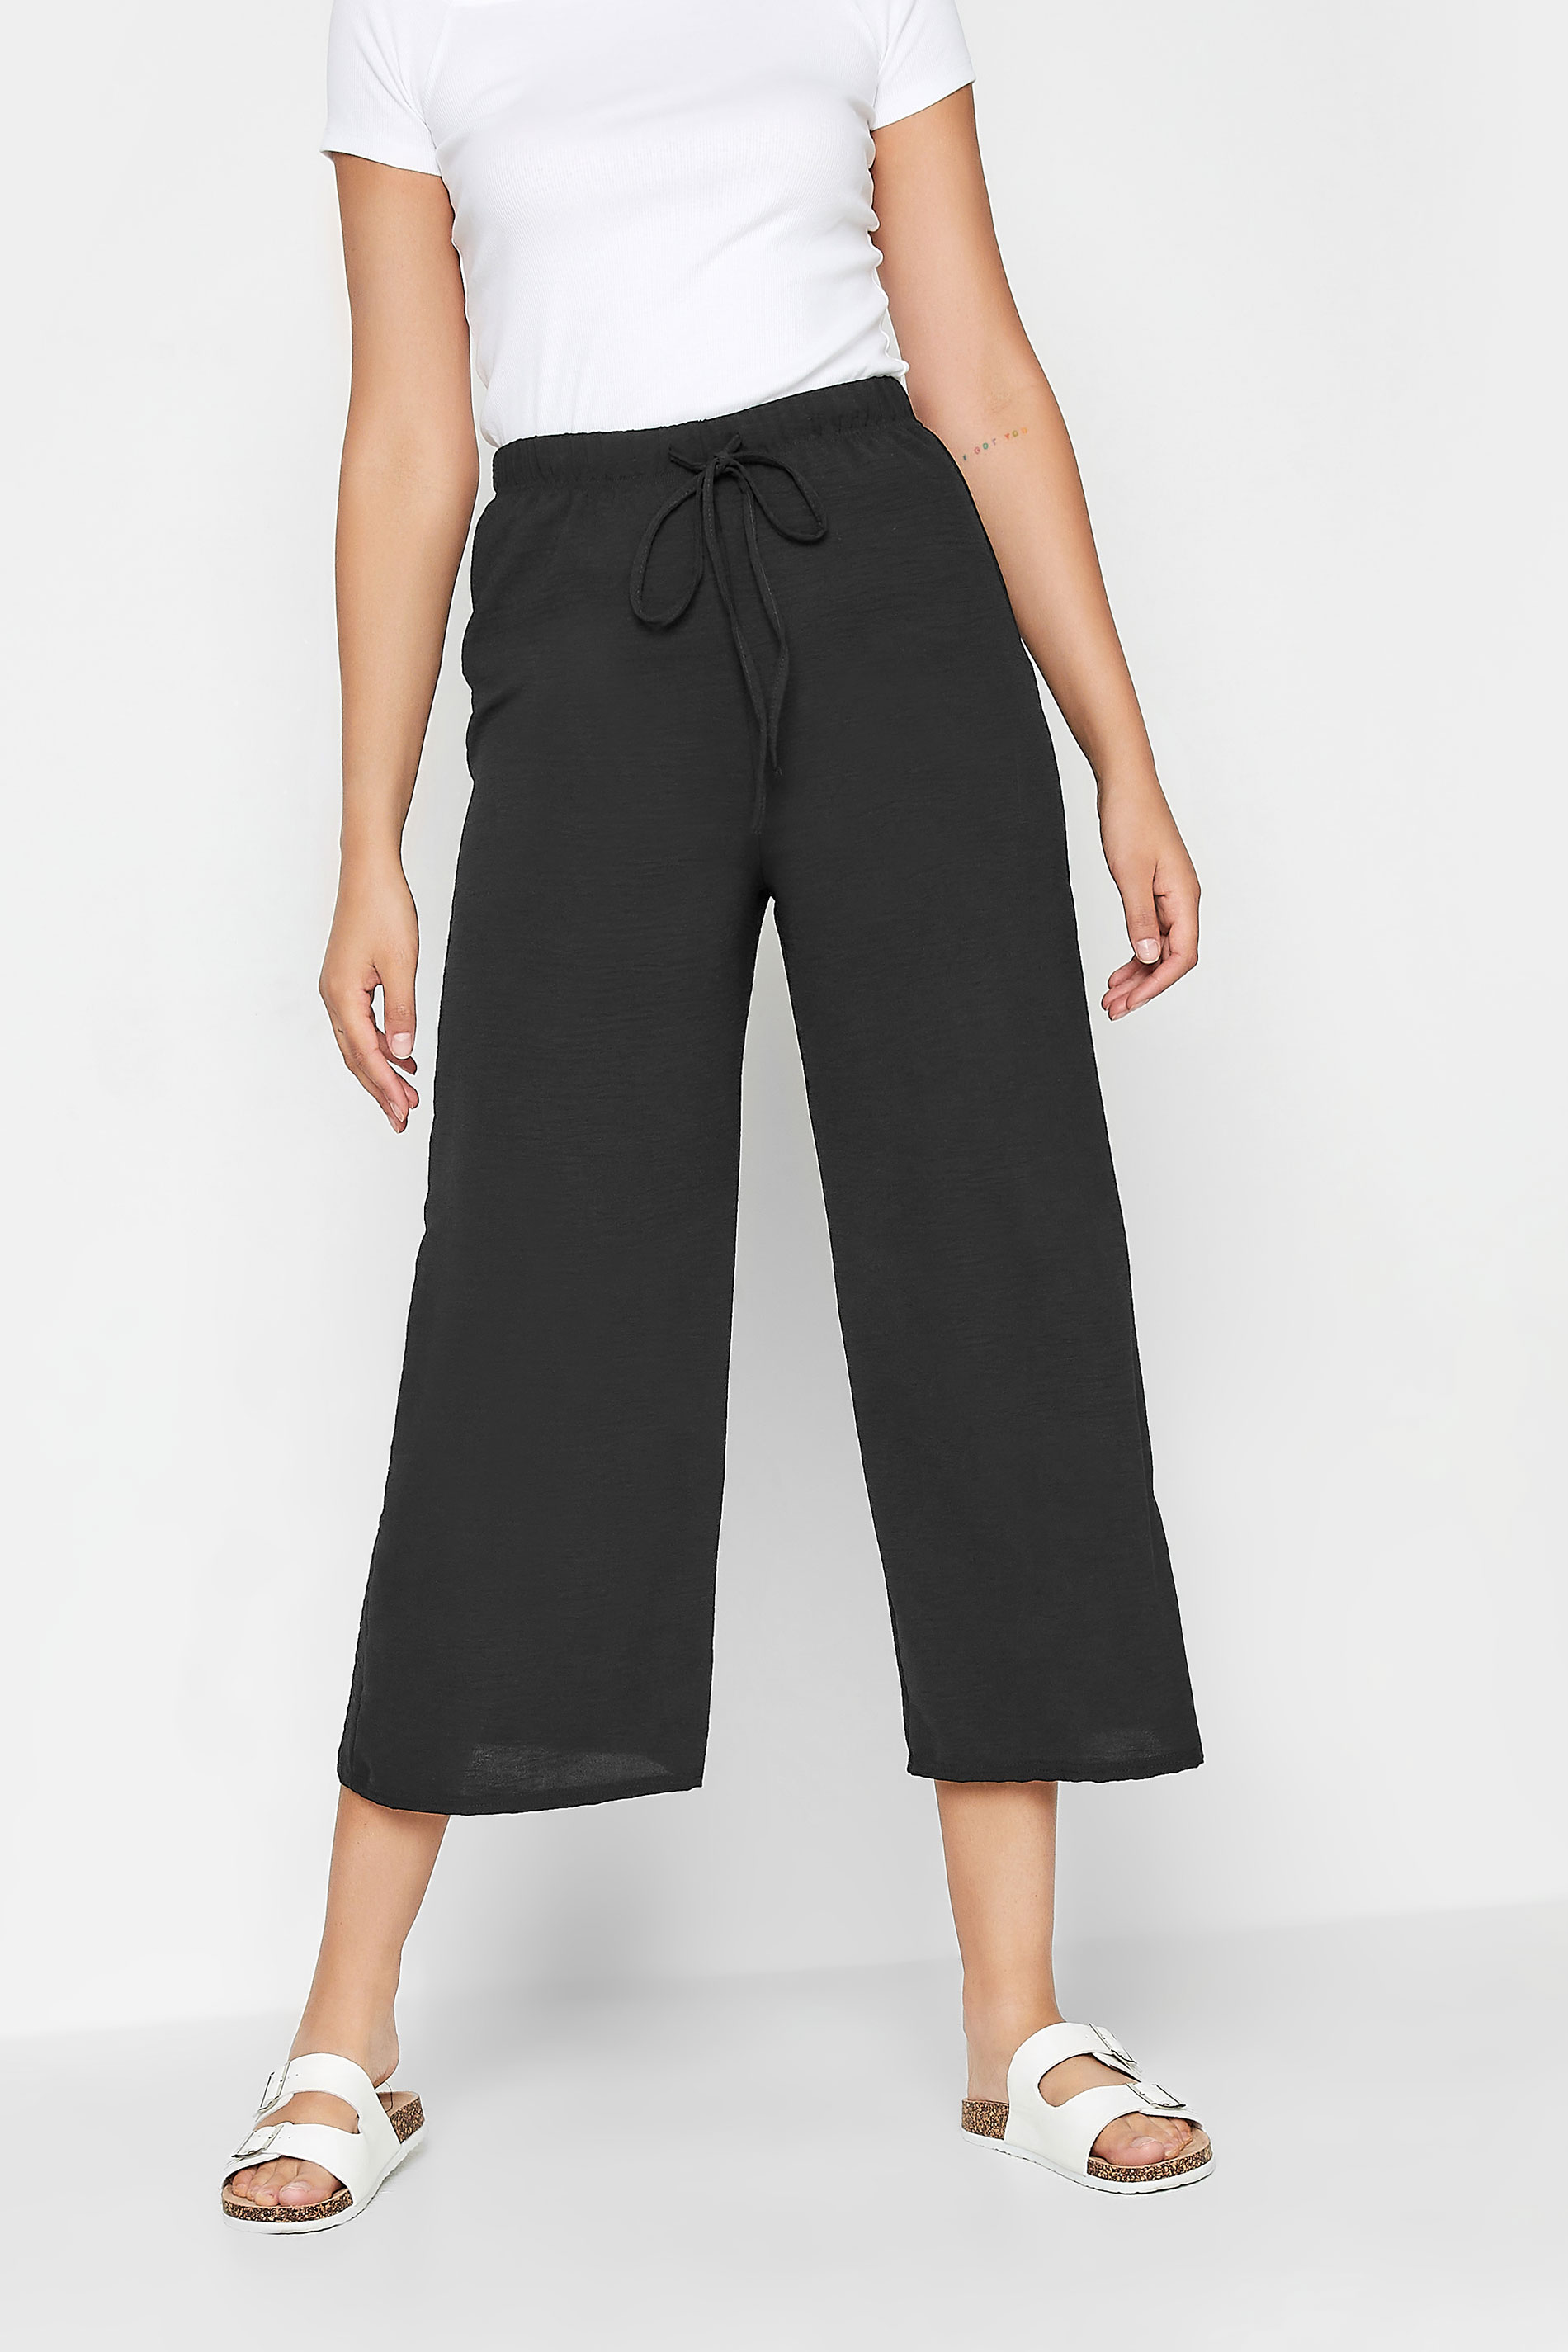 LTS Tall Black Crepe Wide Leg Cropped Trousers | Long Tall Sally 1